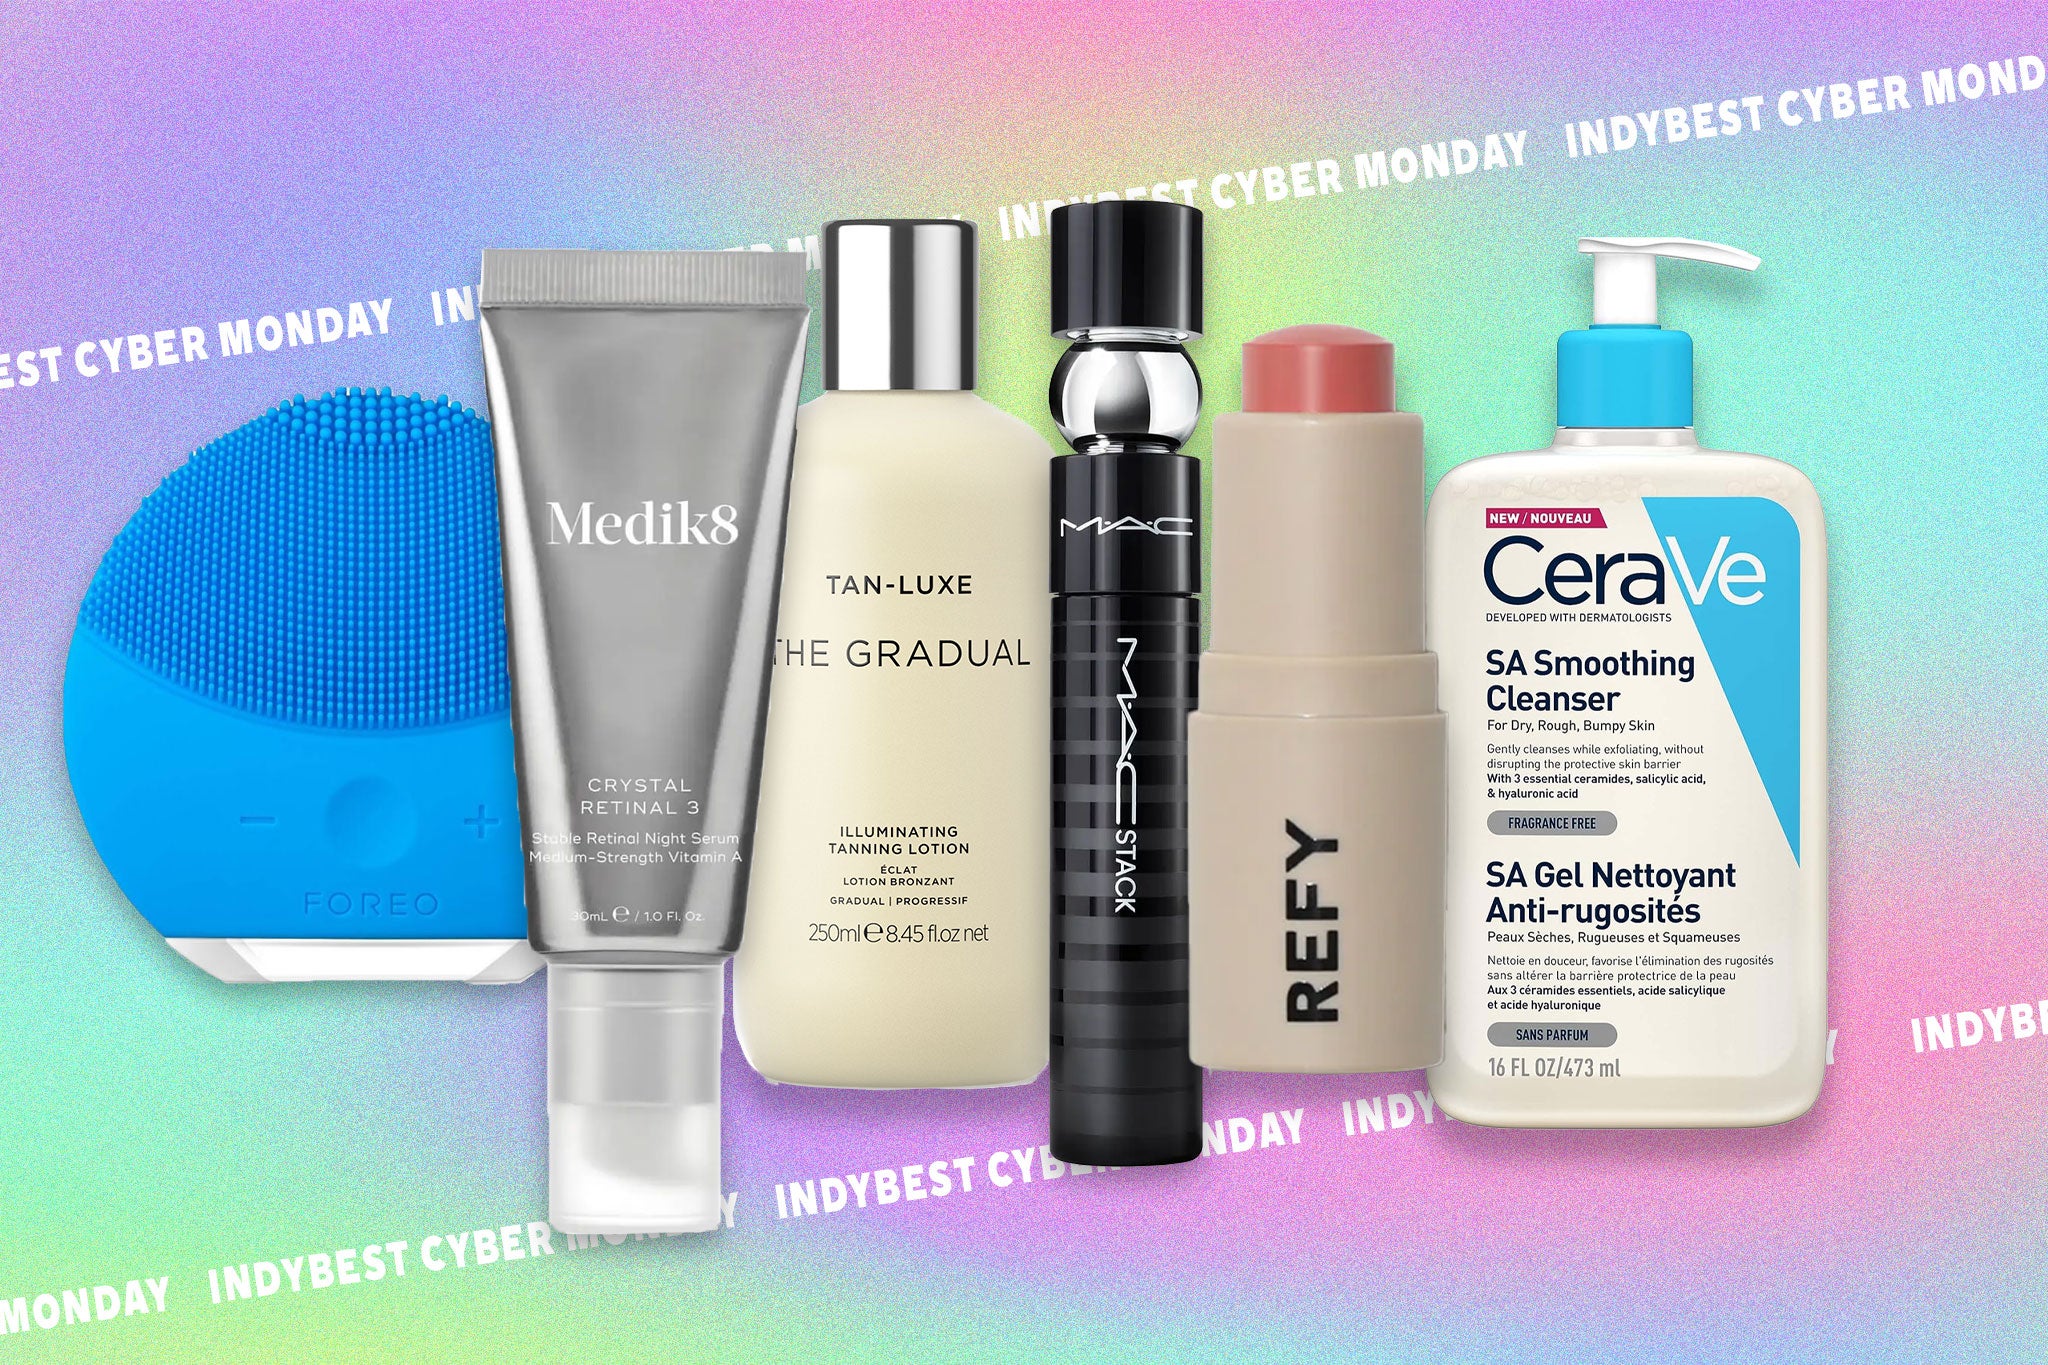 black friday, beauty, make-up, indybest, amazon, black friday, best cyber monday beauty deals on make-up, skincare and more